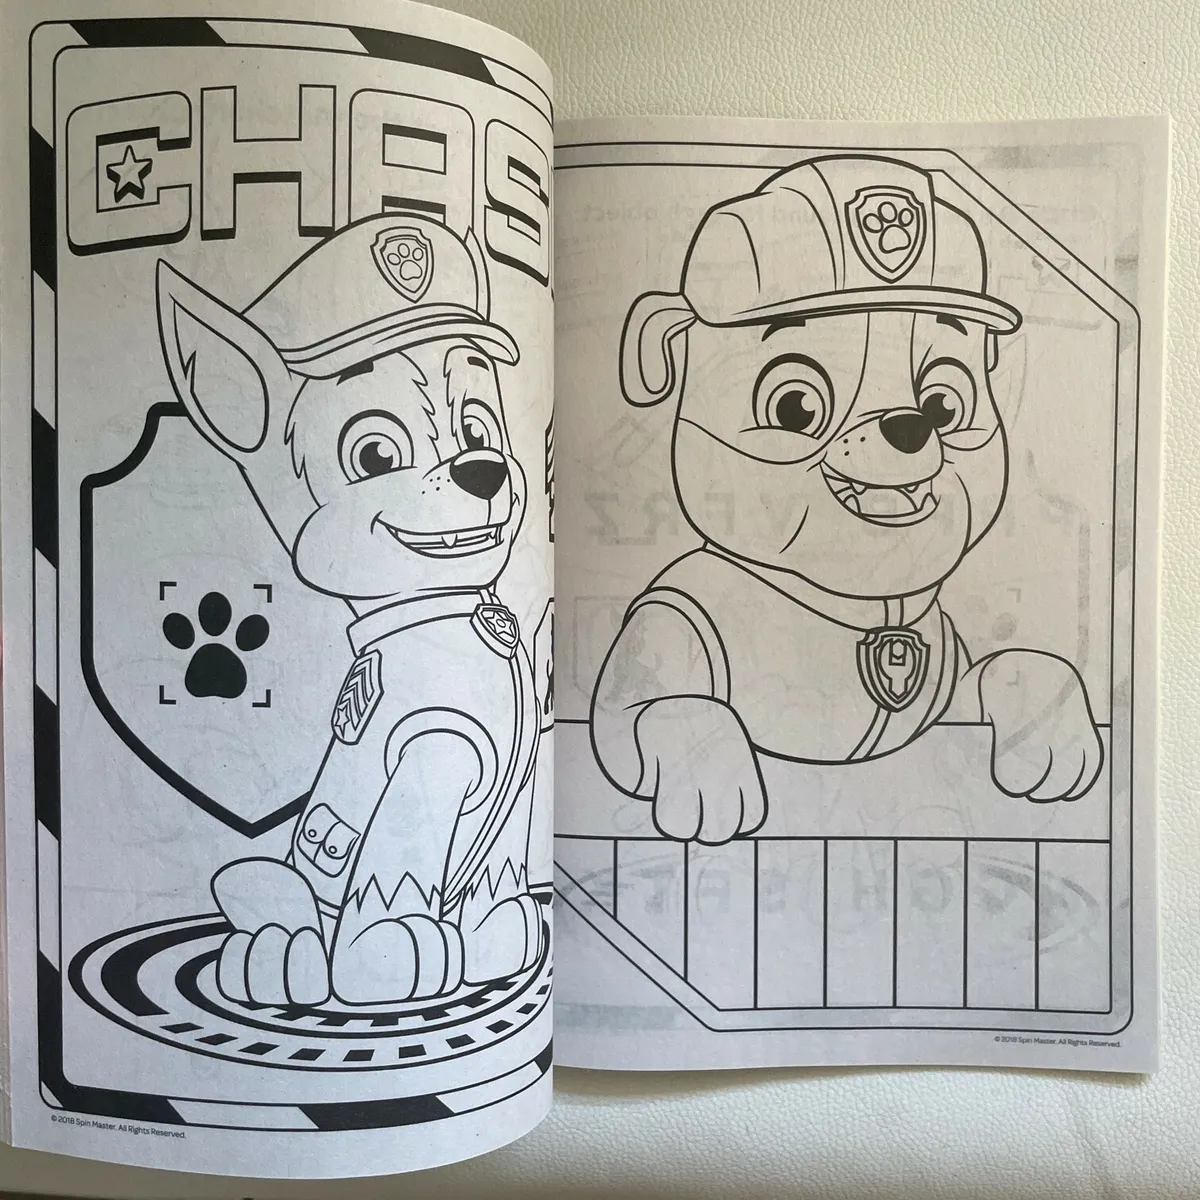 Paw patrol jumbo coloring book new nickeloden licensed marshall chase rubble